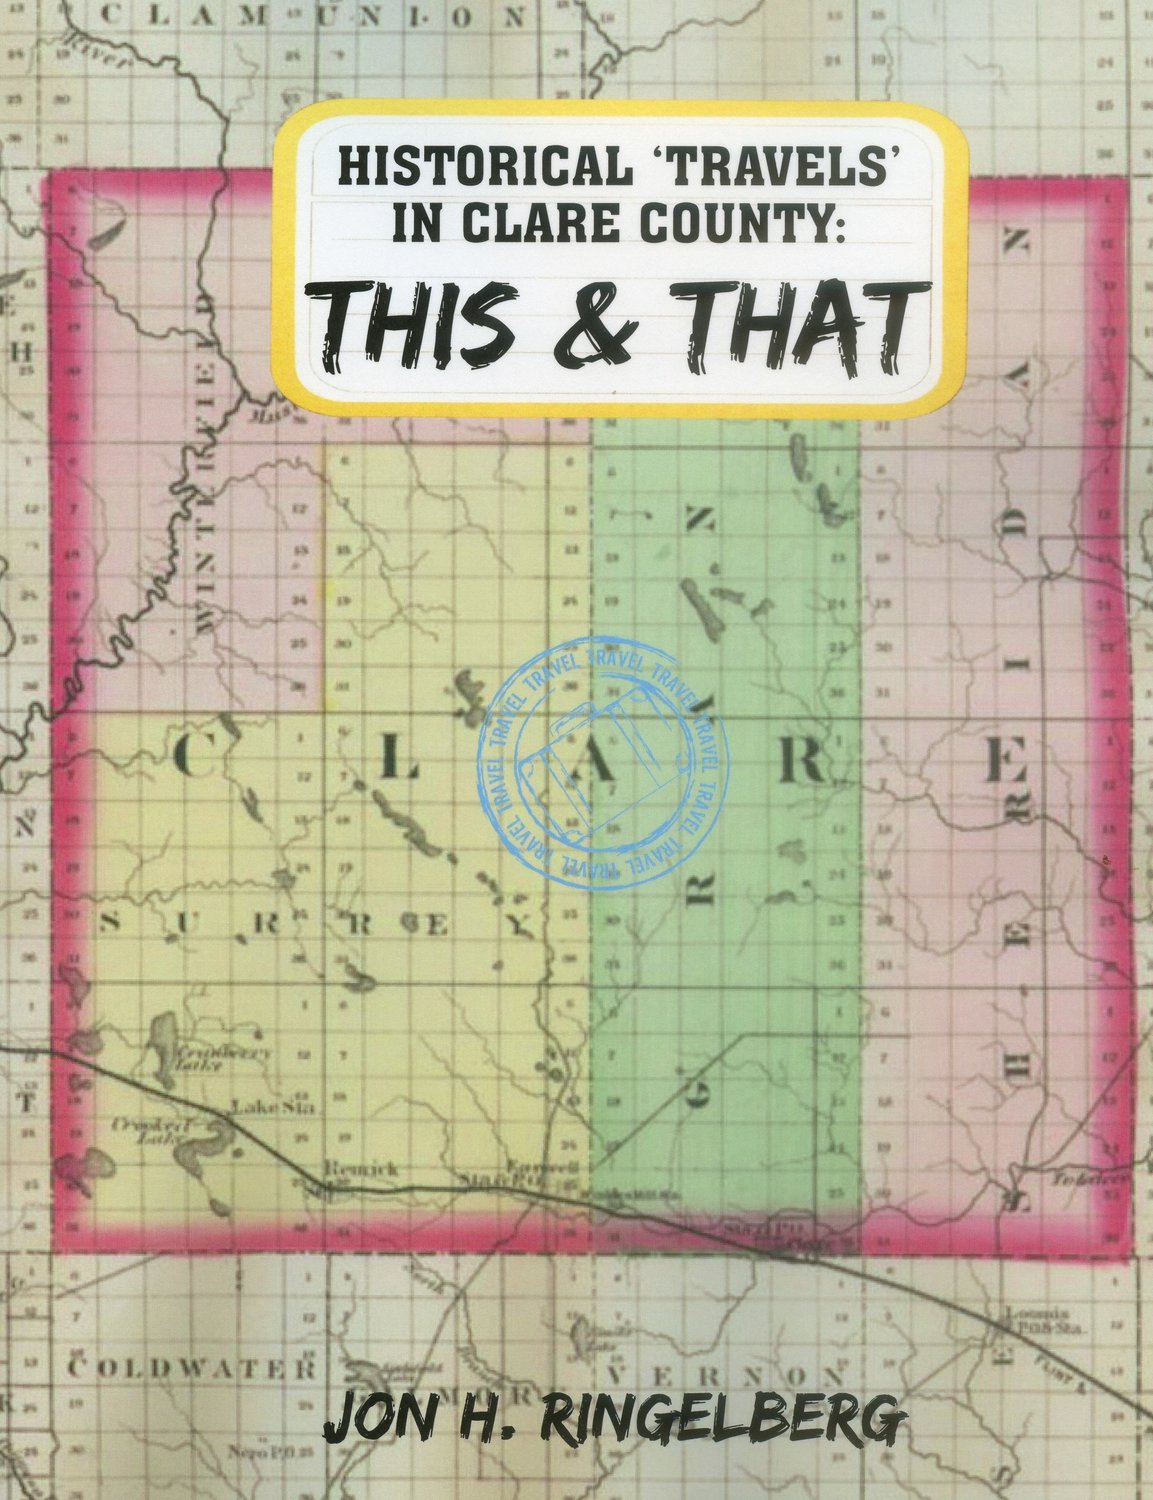 Self-published and available in October of this year is Ringelberg’s new book Historical ‘Travels’ in Clare County: This & That. The book will be available at the Cleaver office and on Amazon in October.